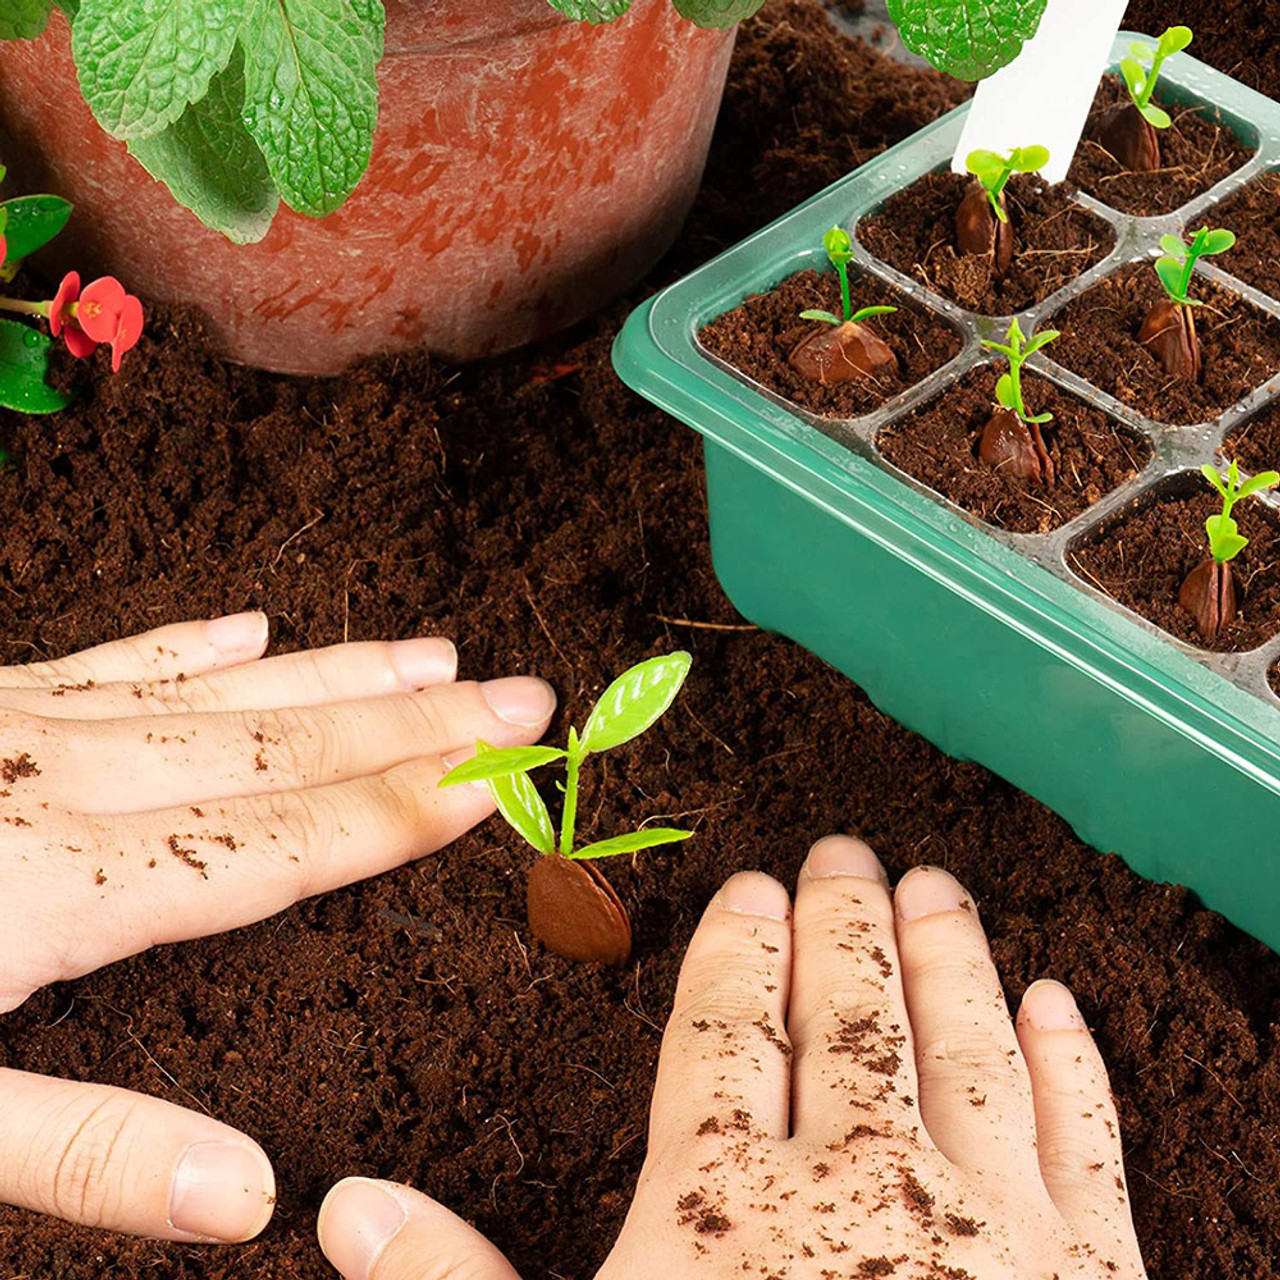 10-Piece Seed Starter Seedling Tray Kit product image